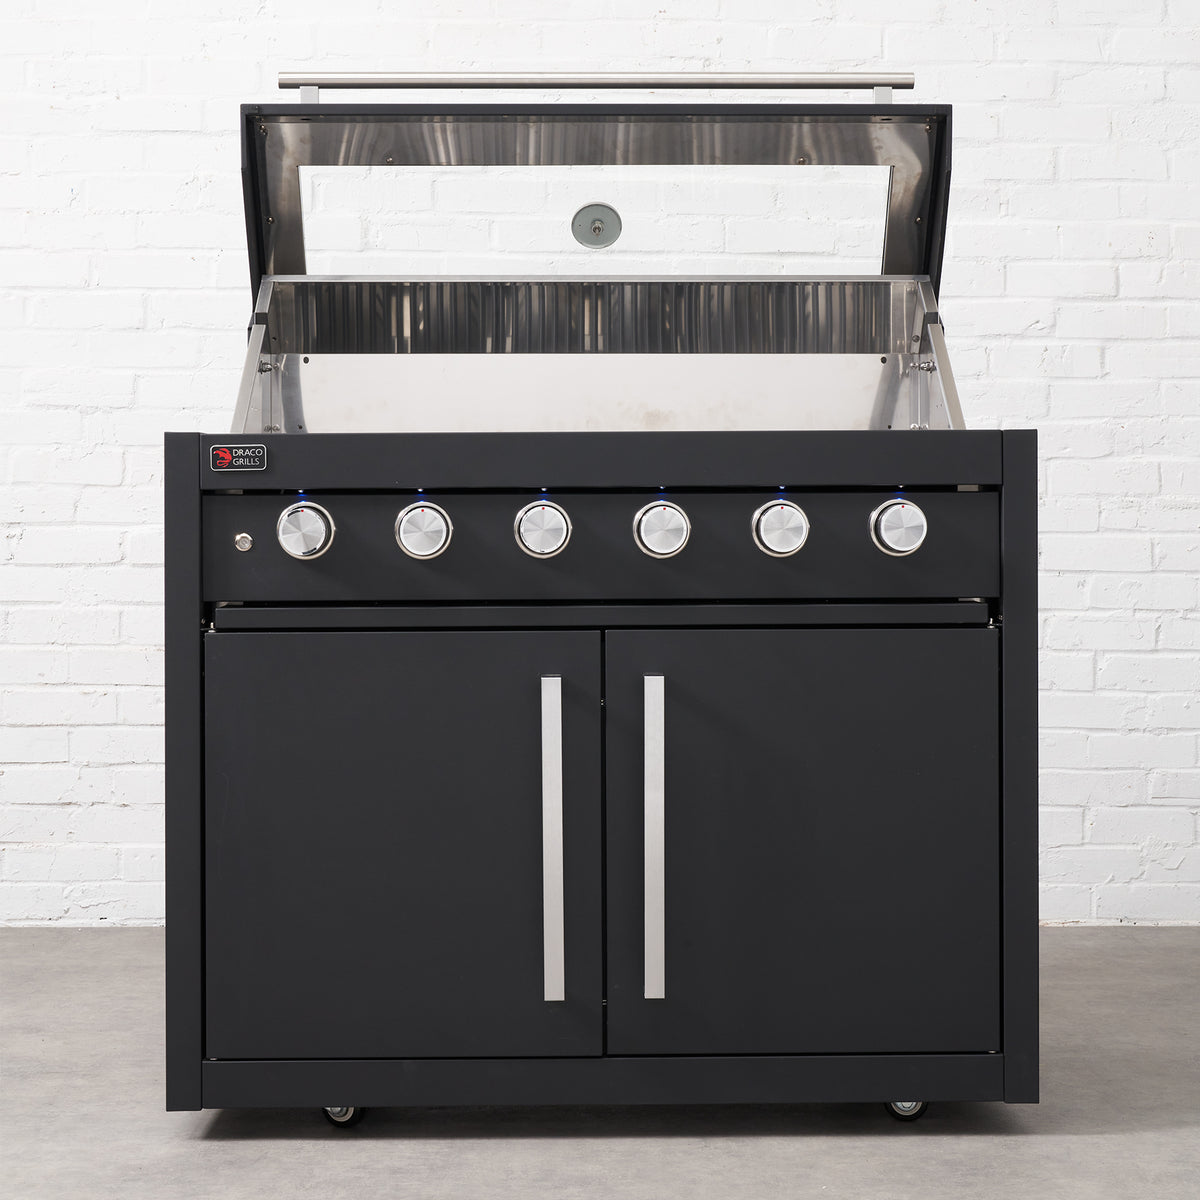 Draco Grills Fusion 6 Burner Black Outdoor Kitchen with Modular Side Burner and Double Cupboard